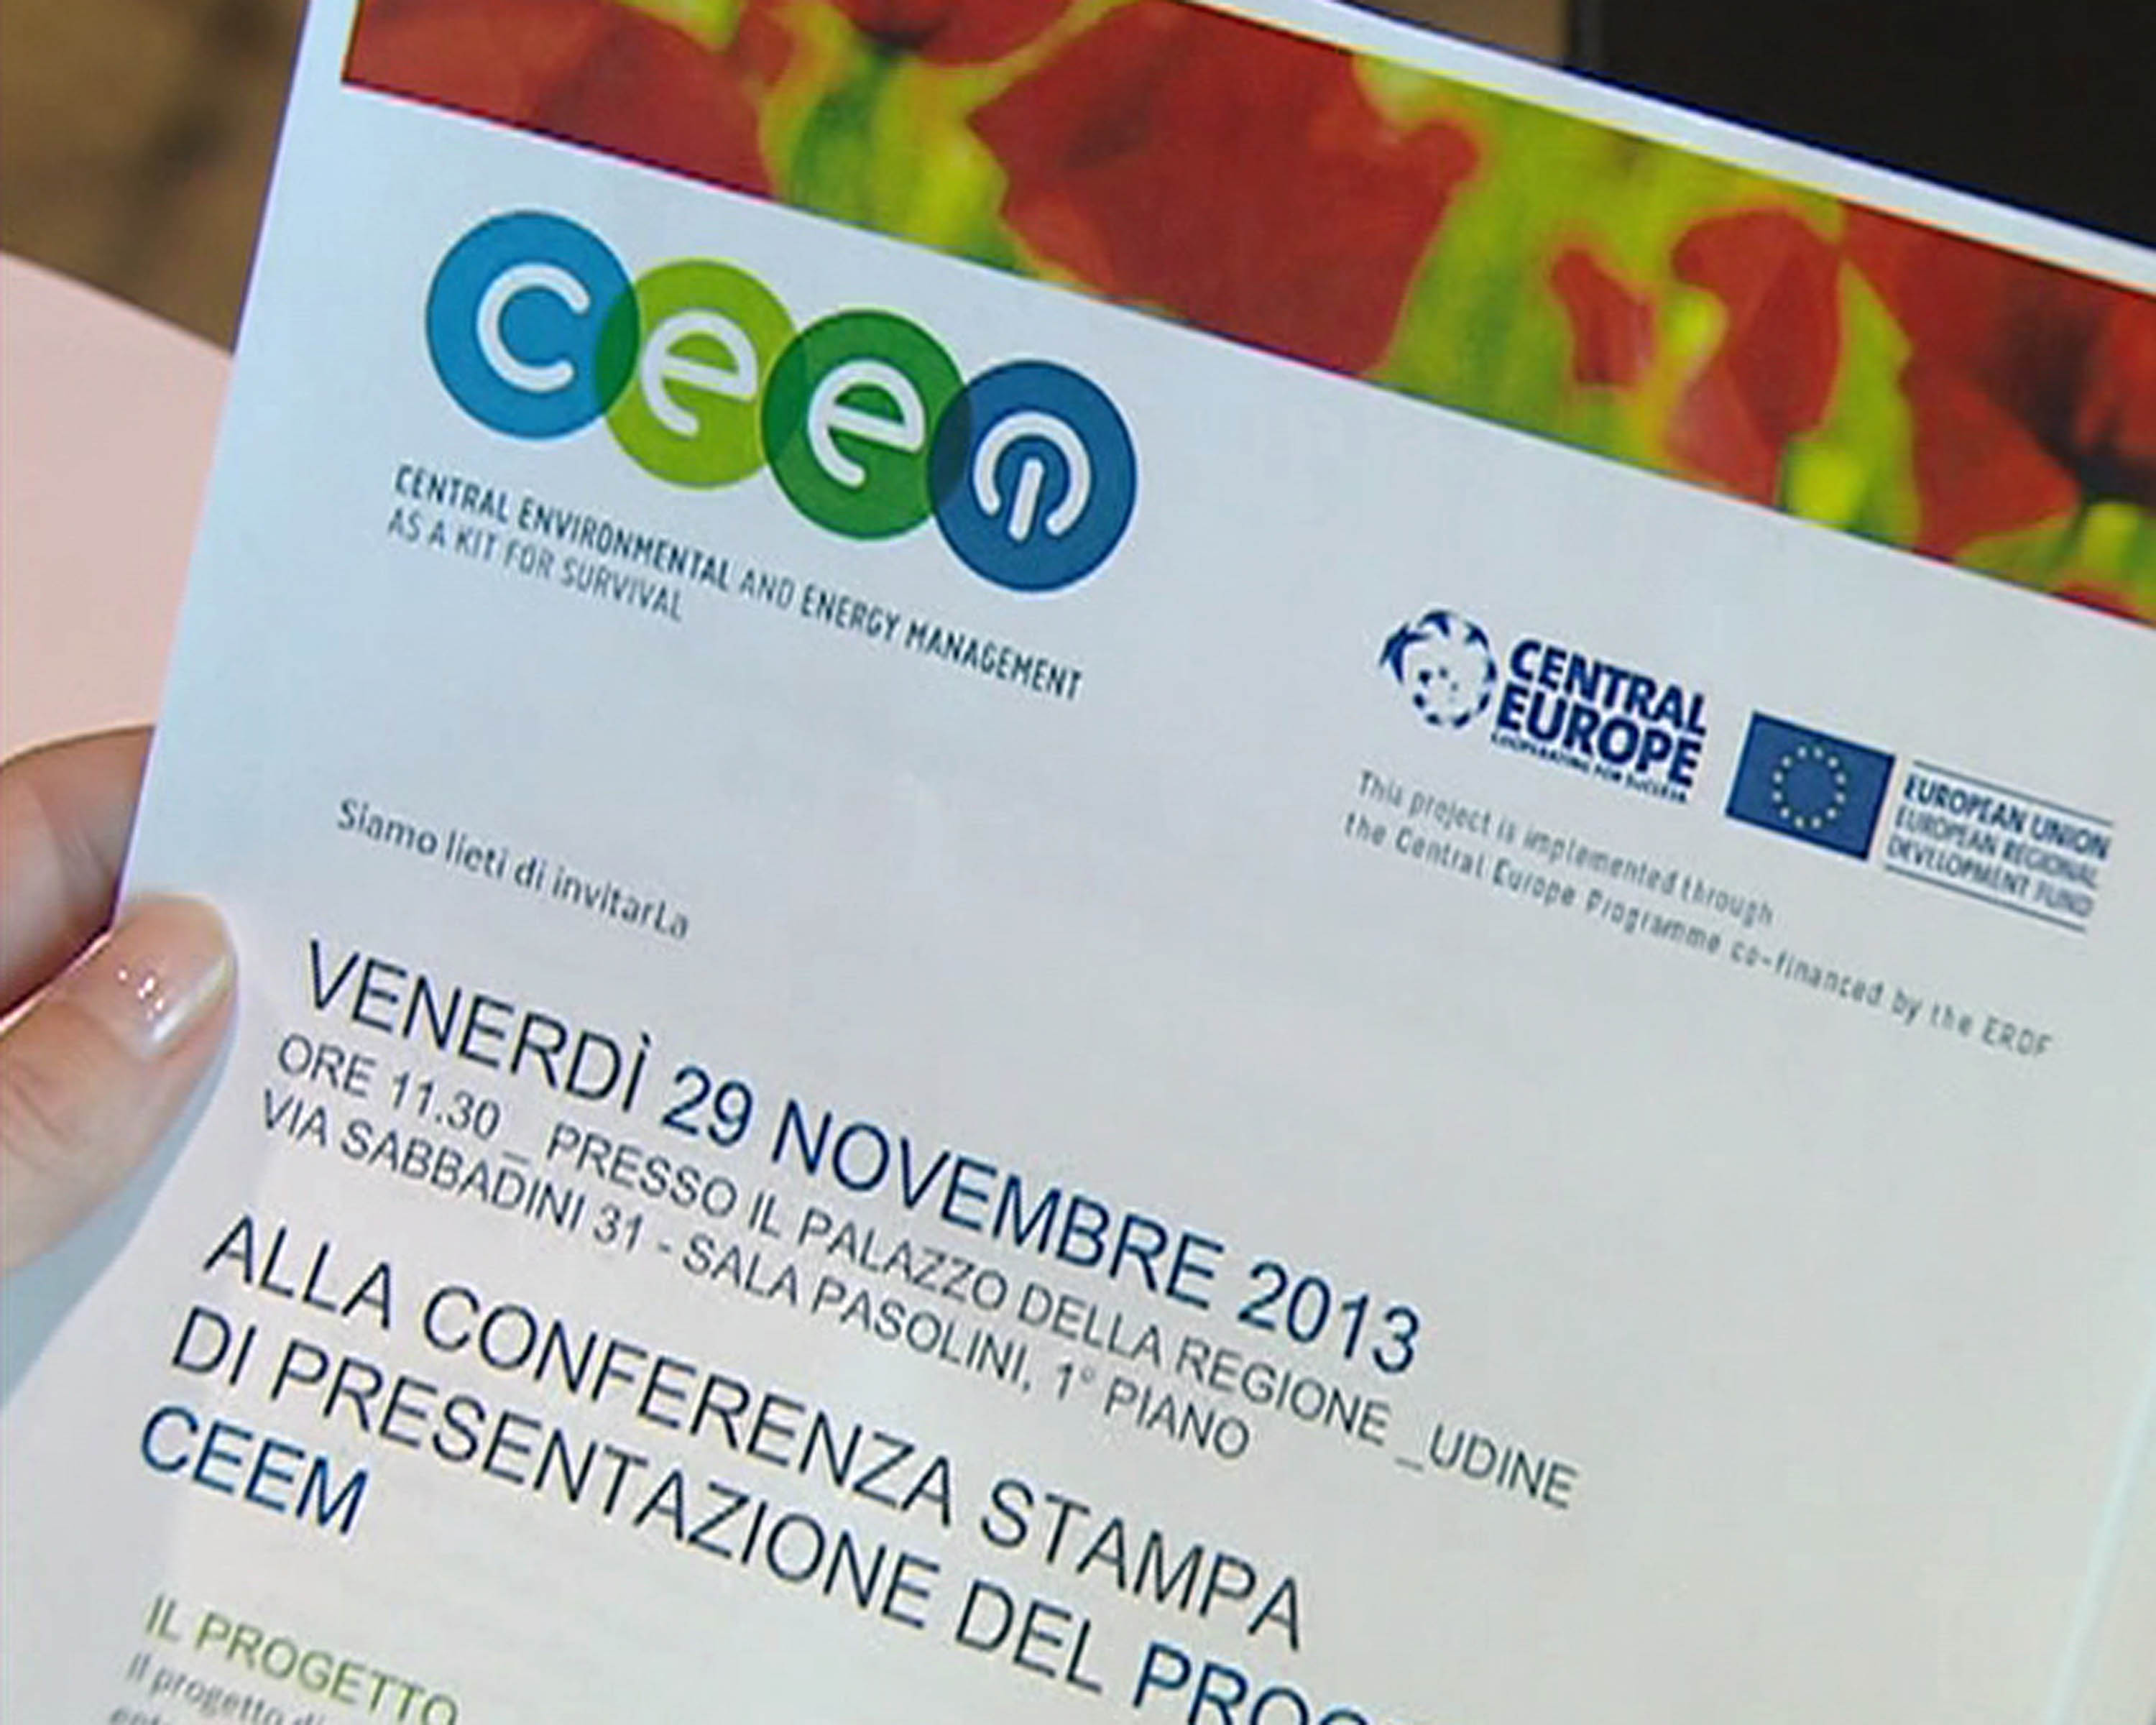 Presentazione del Progetto CEEM-Central Environmental and Energy Management as a kit for survival - Udine 29/11/2013